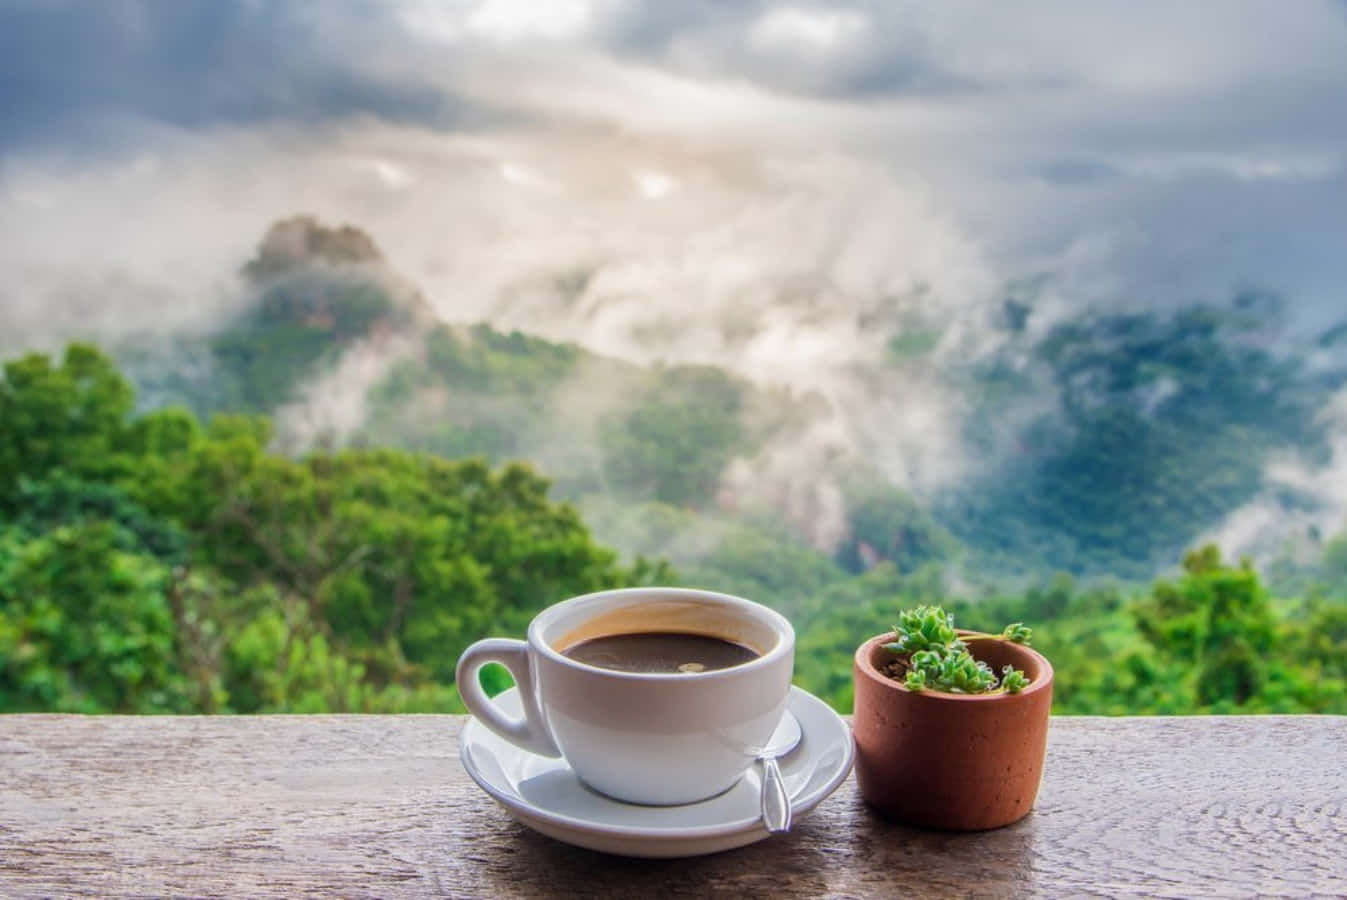 Coffee Cup On A Wooden Table With A View Of The Mountains